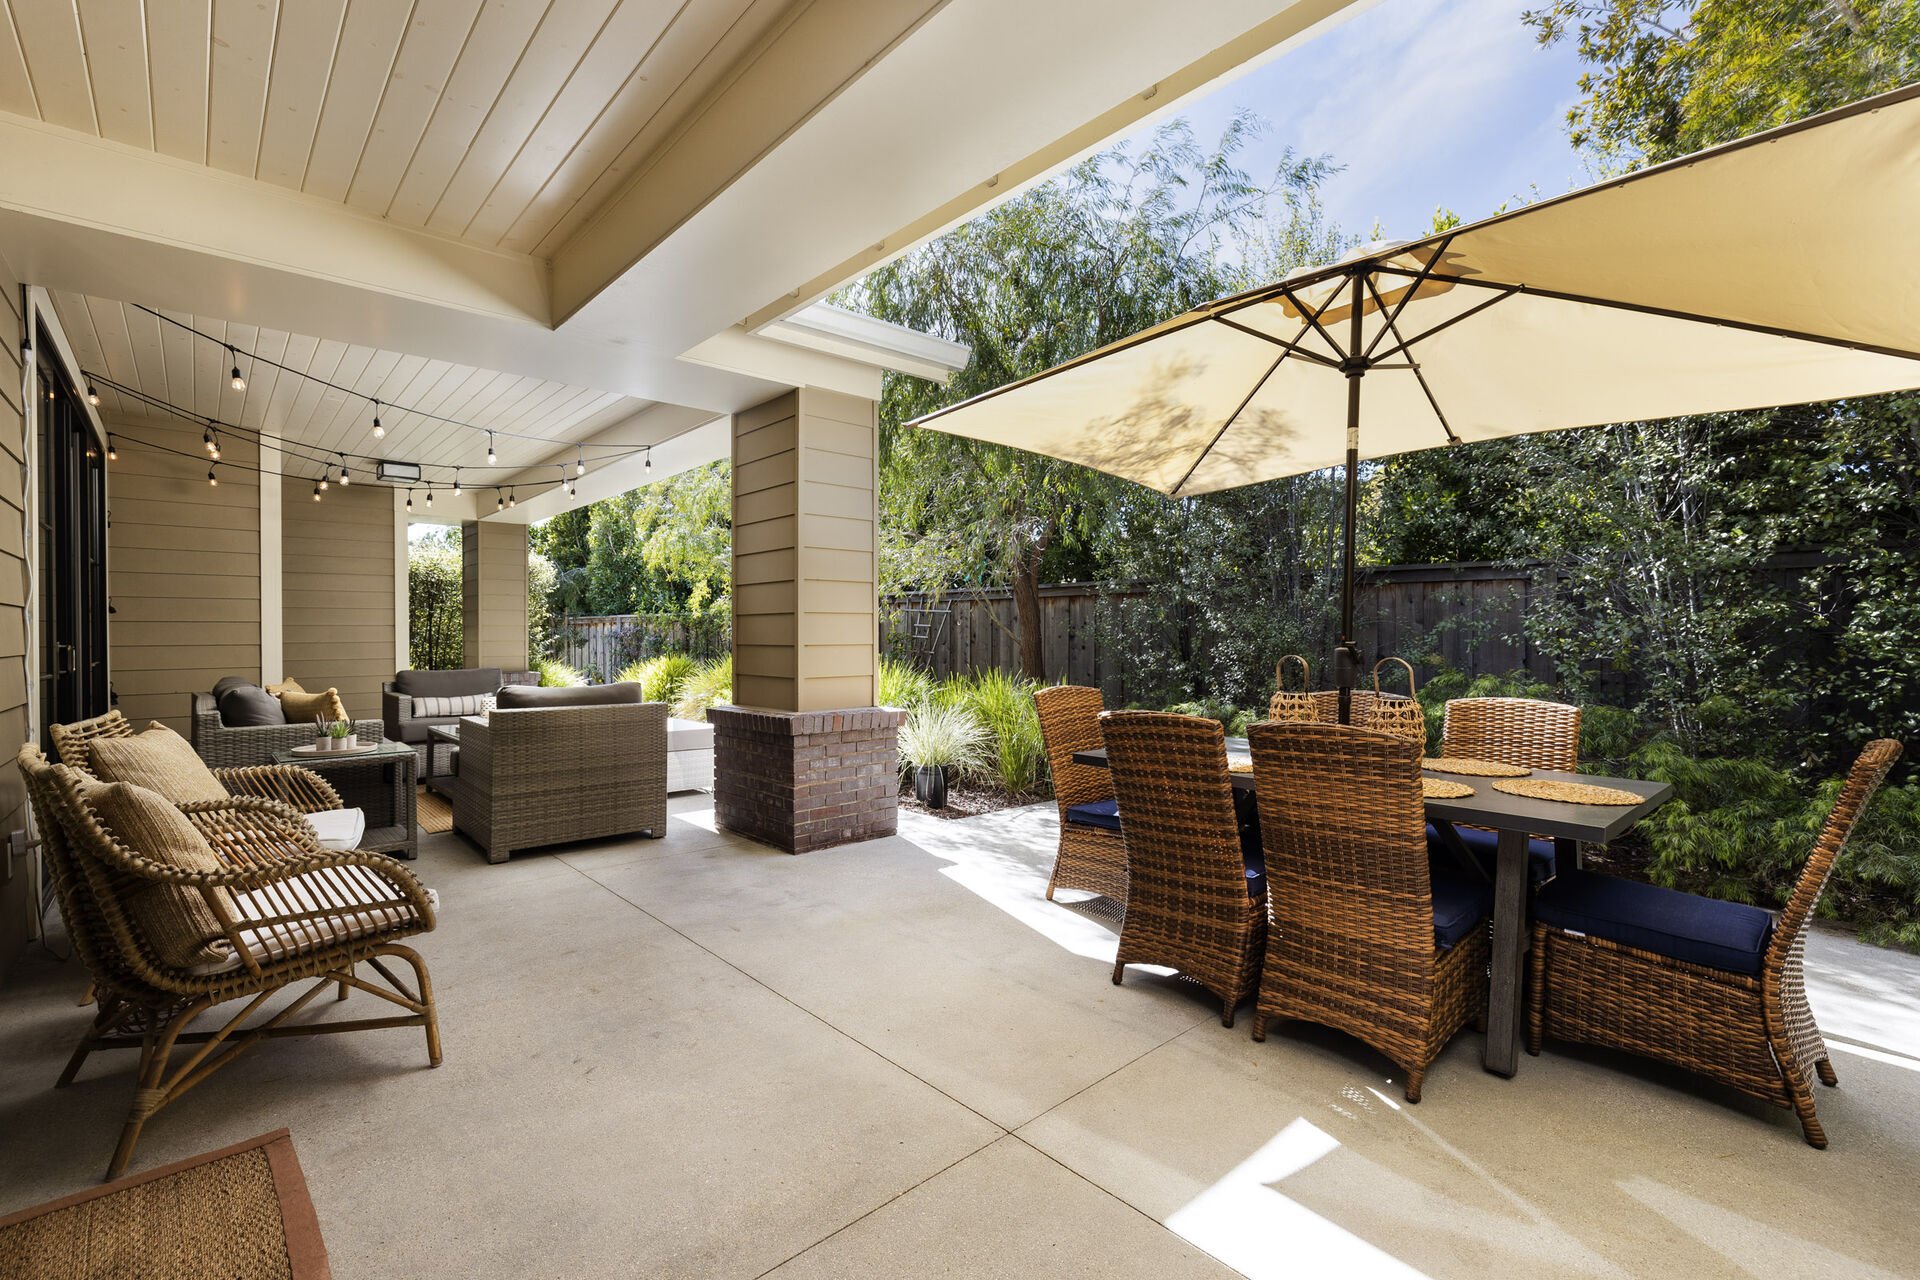 Large covered patio